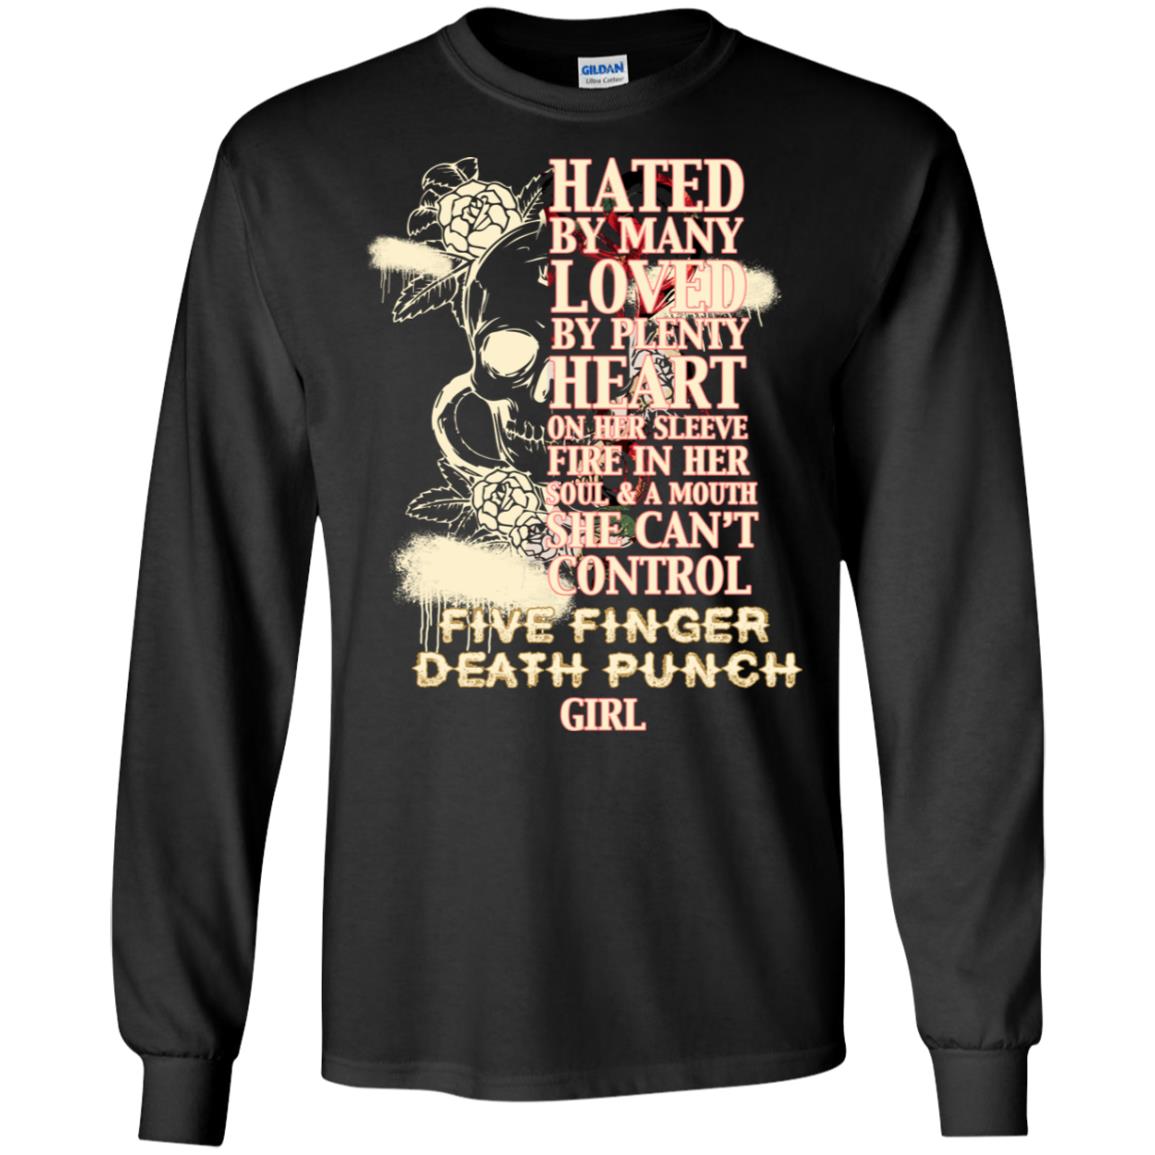 Hated By Many Loved By Plenty Heart On Her Sleeve Fire In Her Soul And Mouth She Can't Control Five Finger Death Punch GirlG240 Gildan LS Ultra Cotton T-Shirt